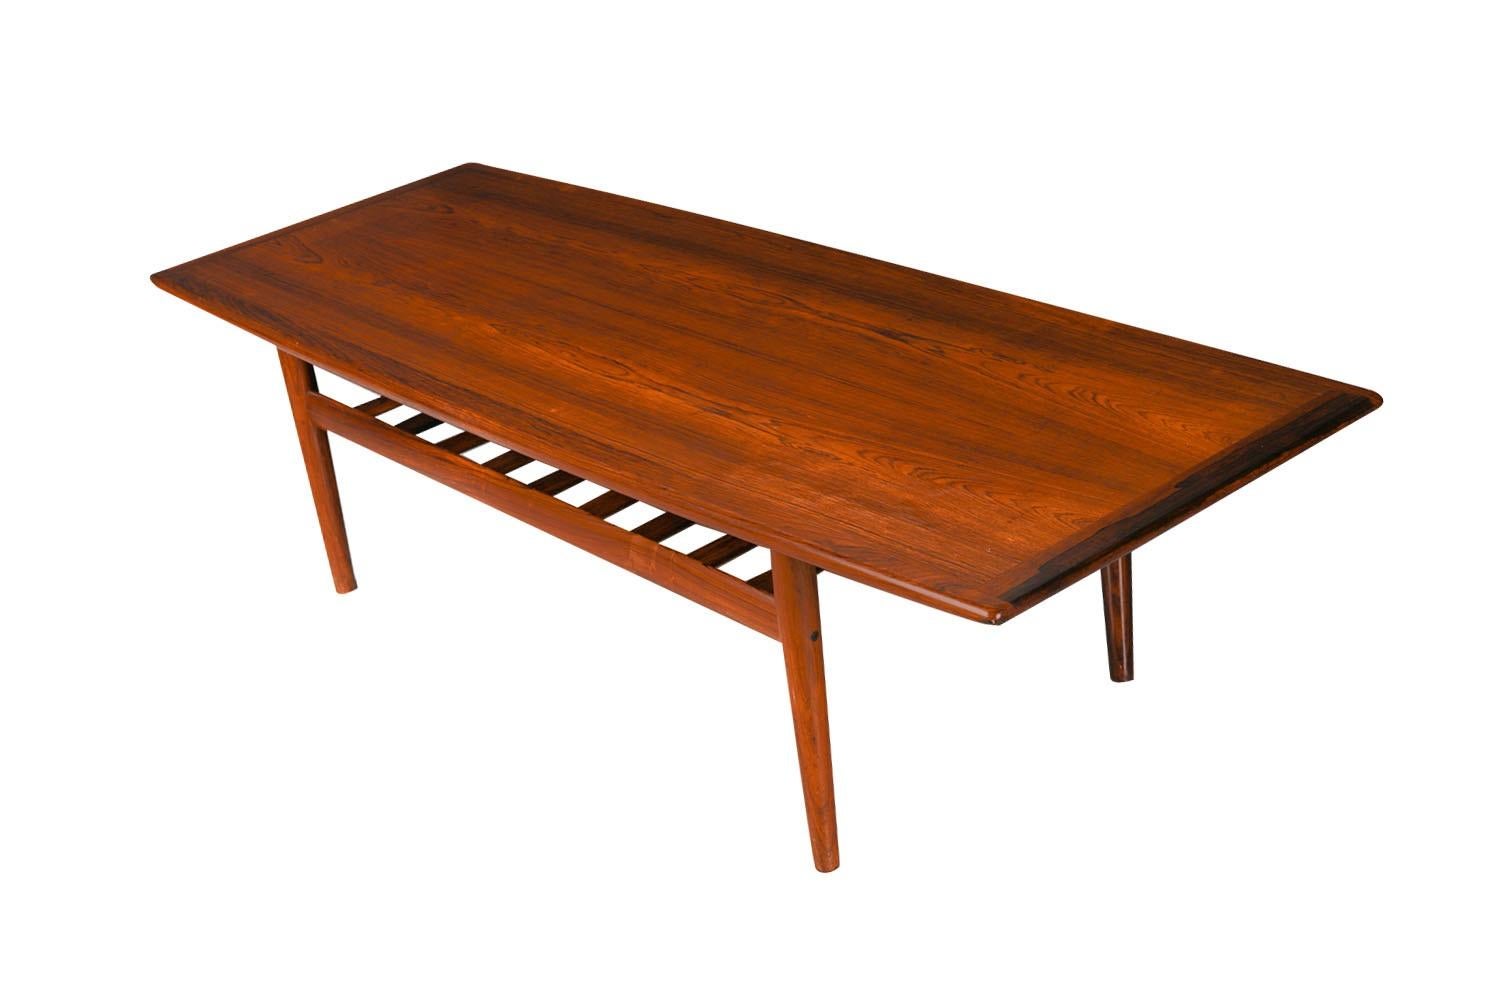 Mid-20th Century Grete Jalk for Glostrup Mid Century Danish Modern Rosewood Coffee Table For Sale